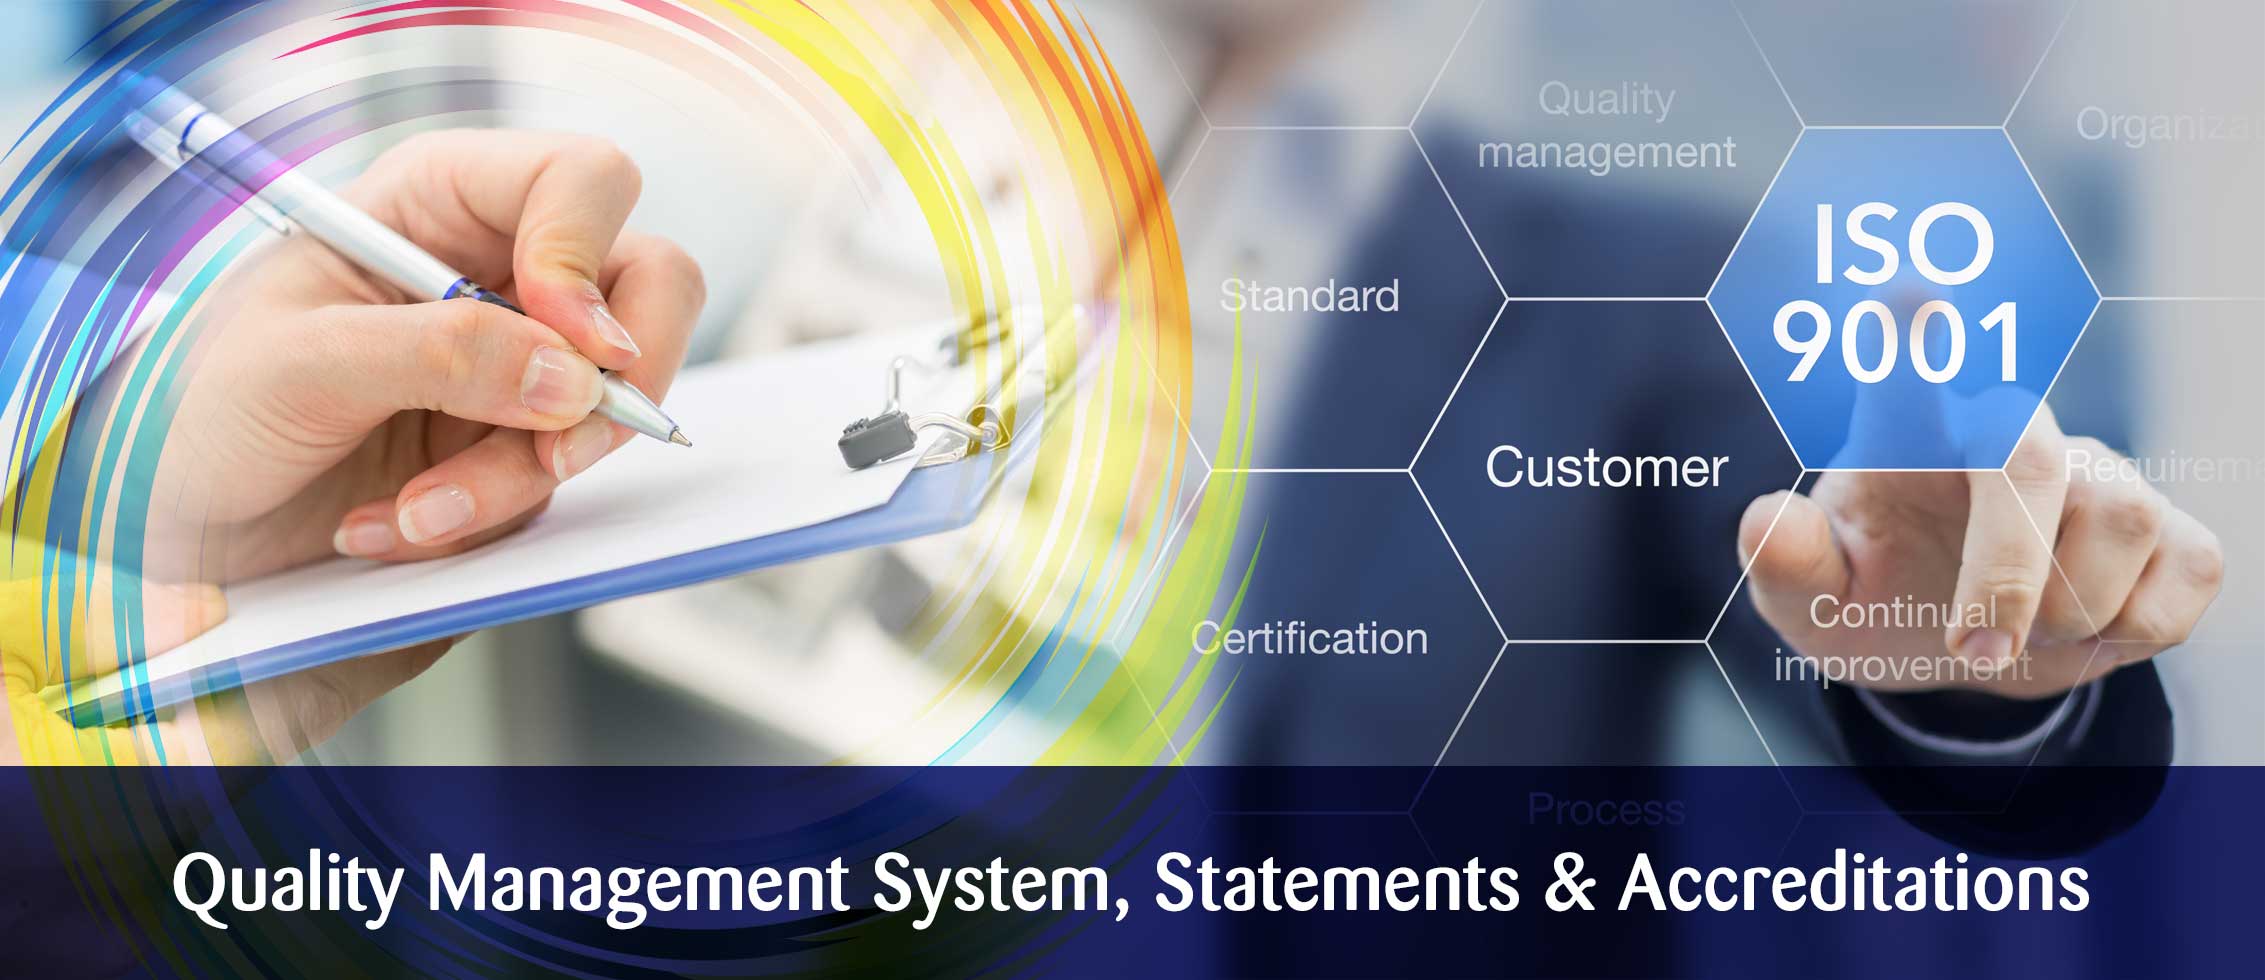 Quality Management System, Statement and Accreditations